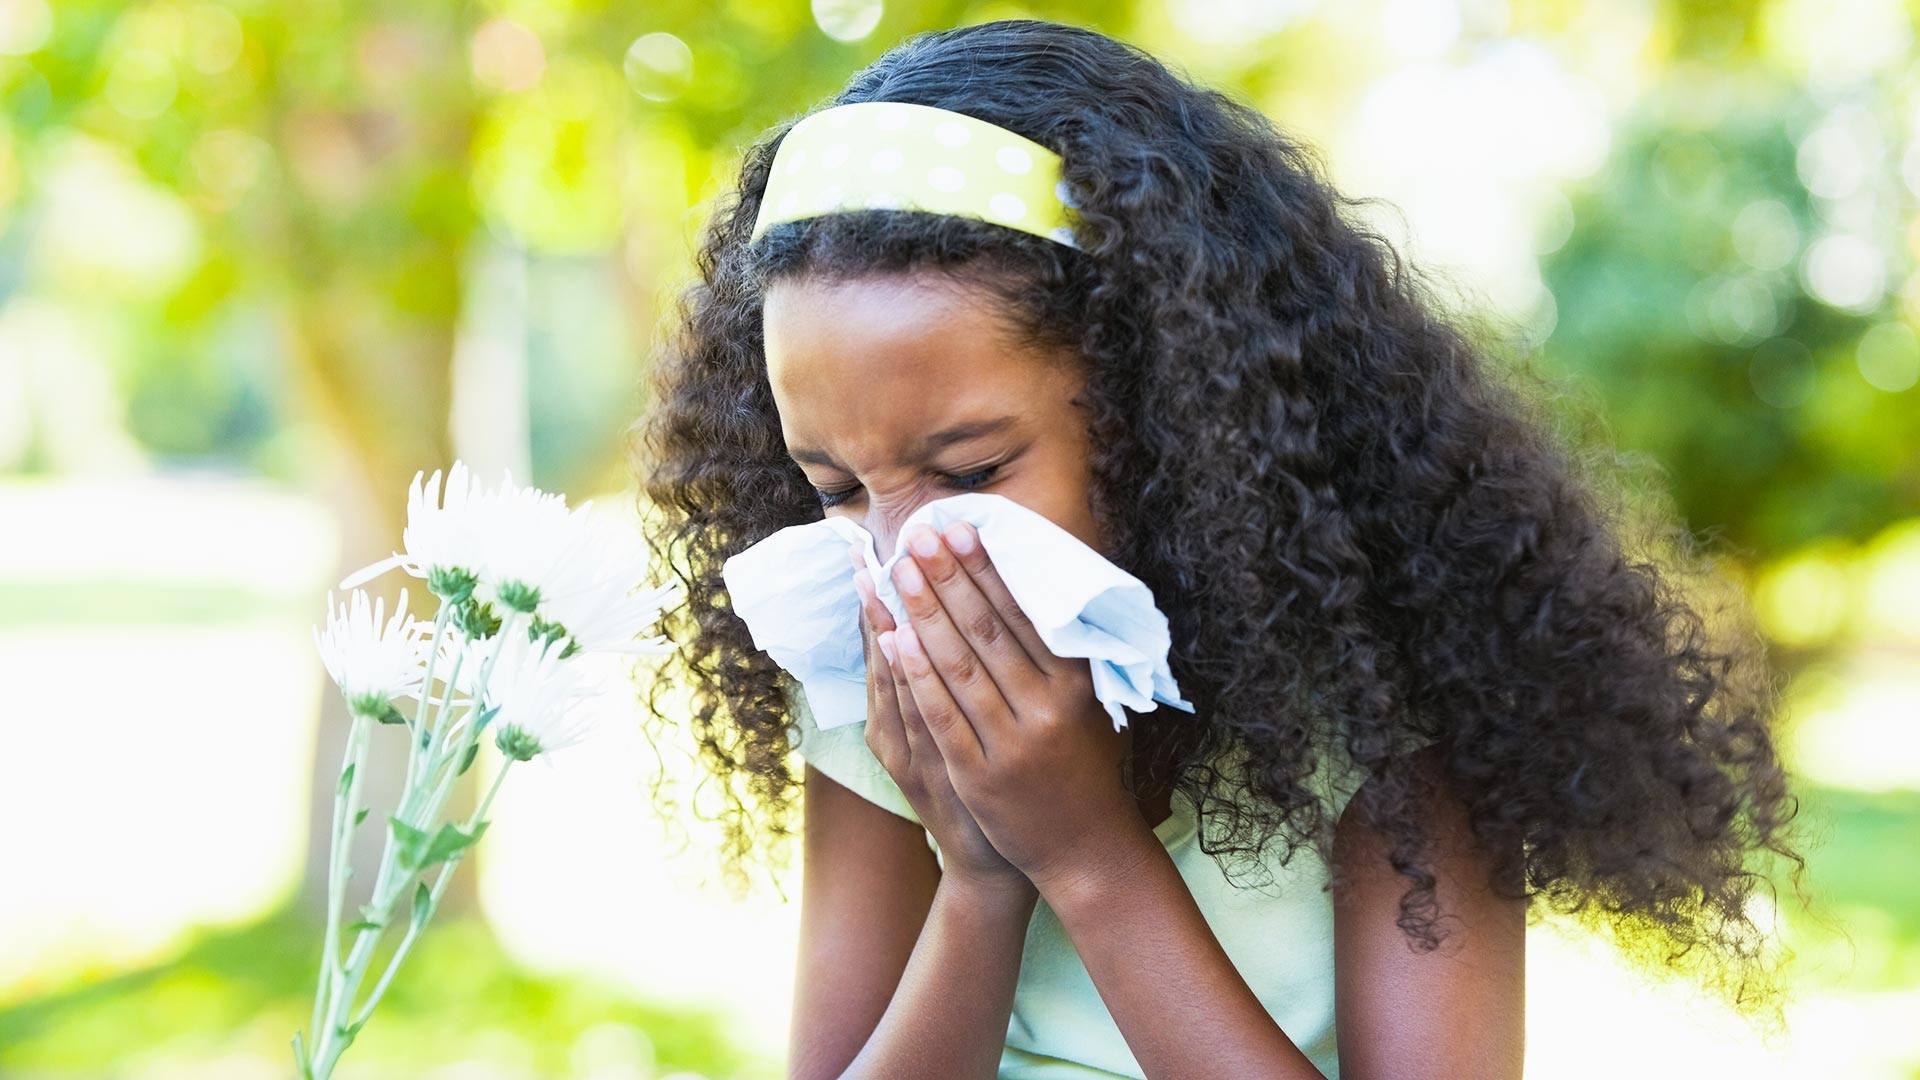 Caring for Your Child’s Seasonal Allergies